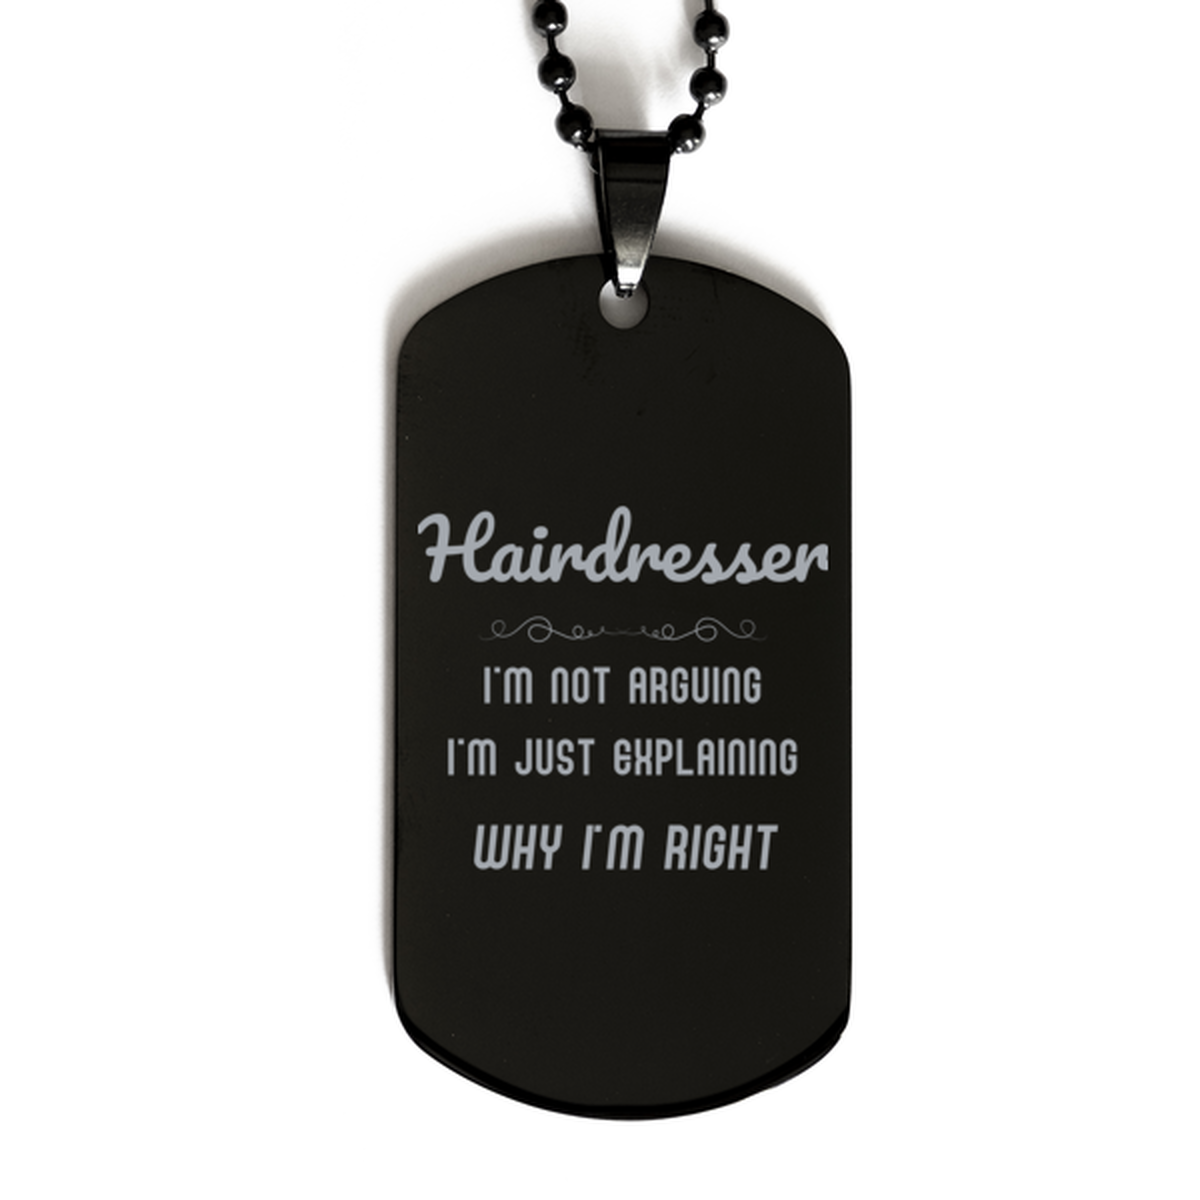 Hairdresser I'm not Arguing. I'm Just Explaining Why I'm RIGHT Black Dog Tag, Funny Saying Quote Hairdresser Gifts For Hairdresser Graduation Birthday Christmas Gifts for Men Women Coworker